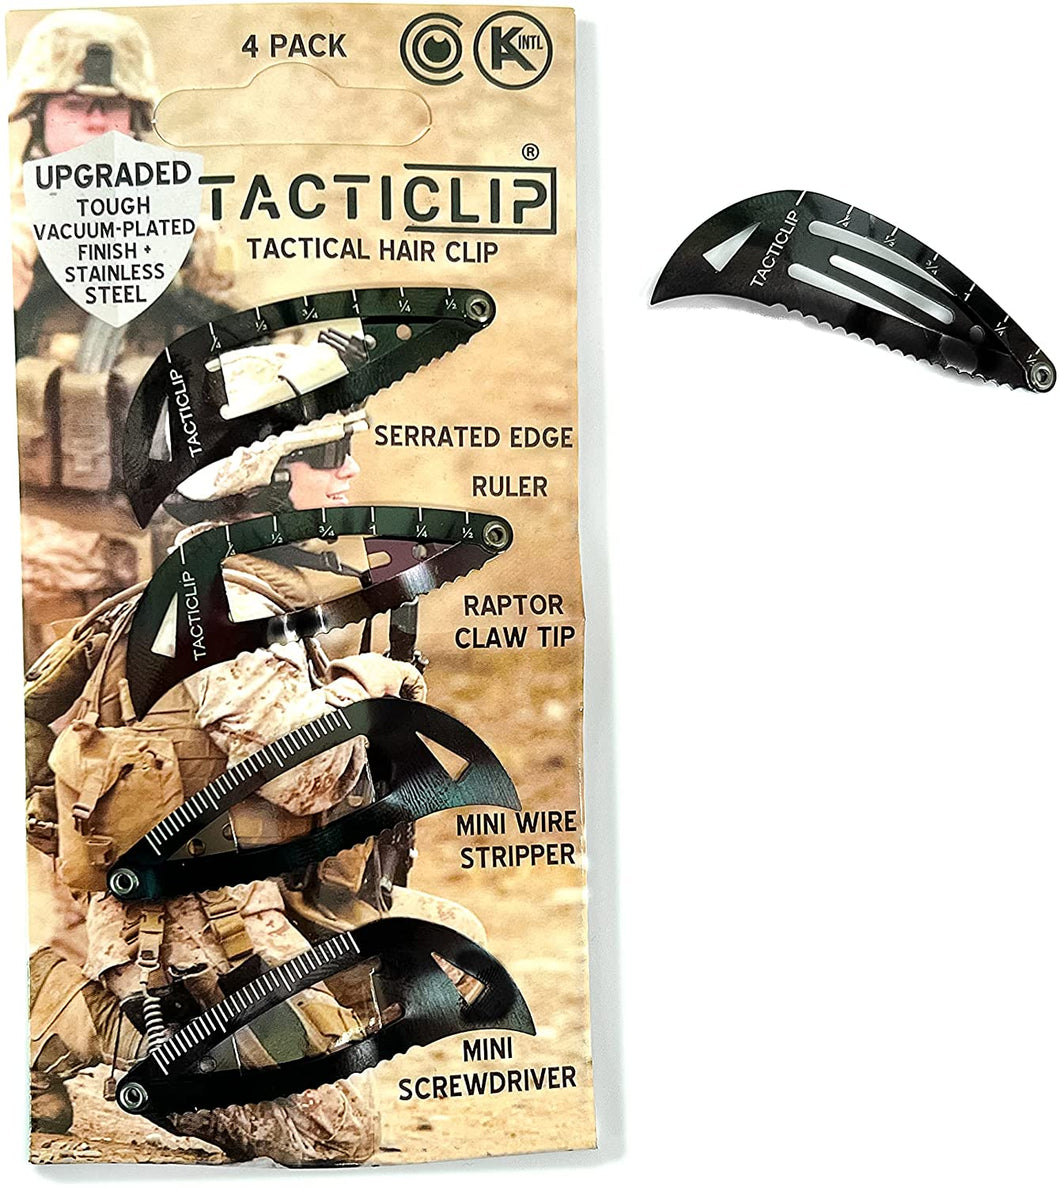 Tacticlip® in Tactical Black - Multitool Tactical Hair Clip - Stainless Steel Electro-vacuum Plated Tough Finish (Black)